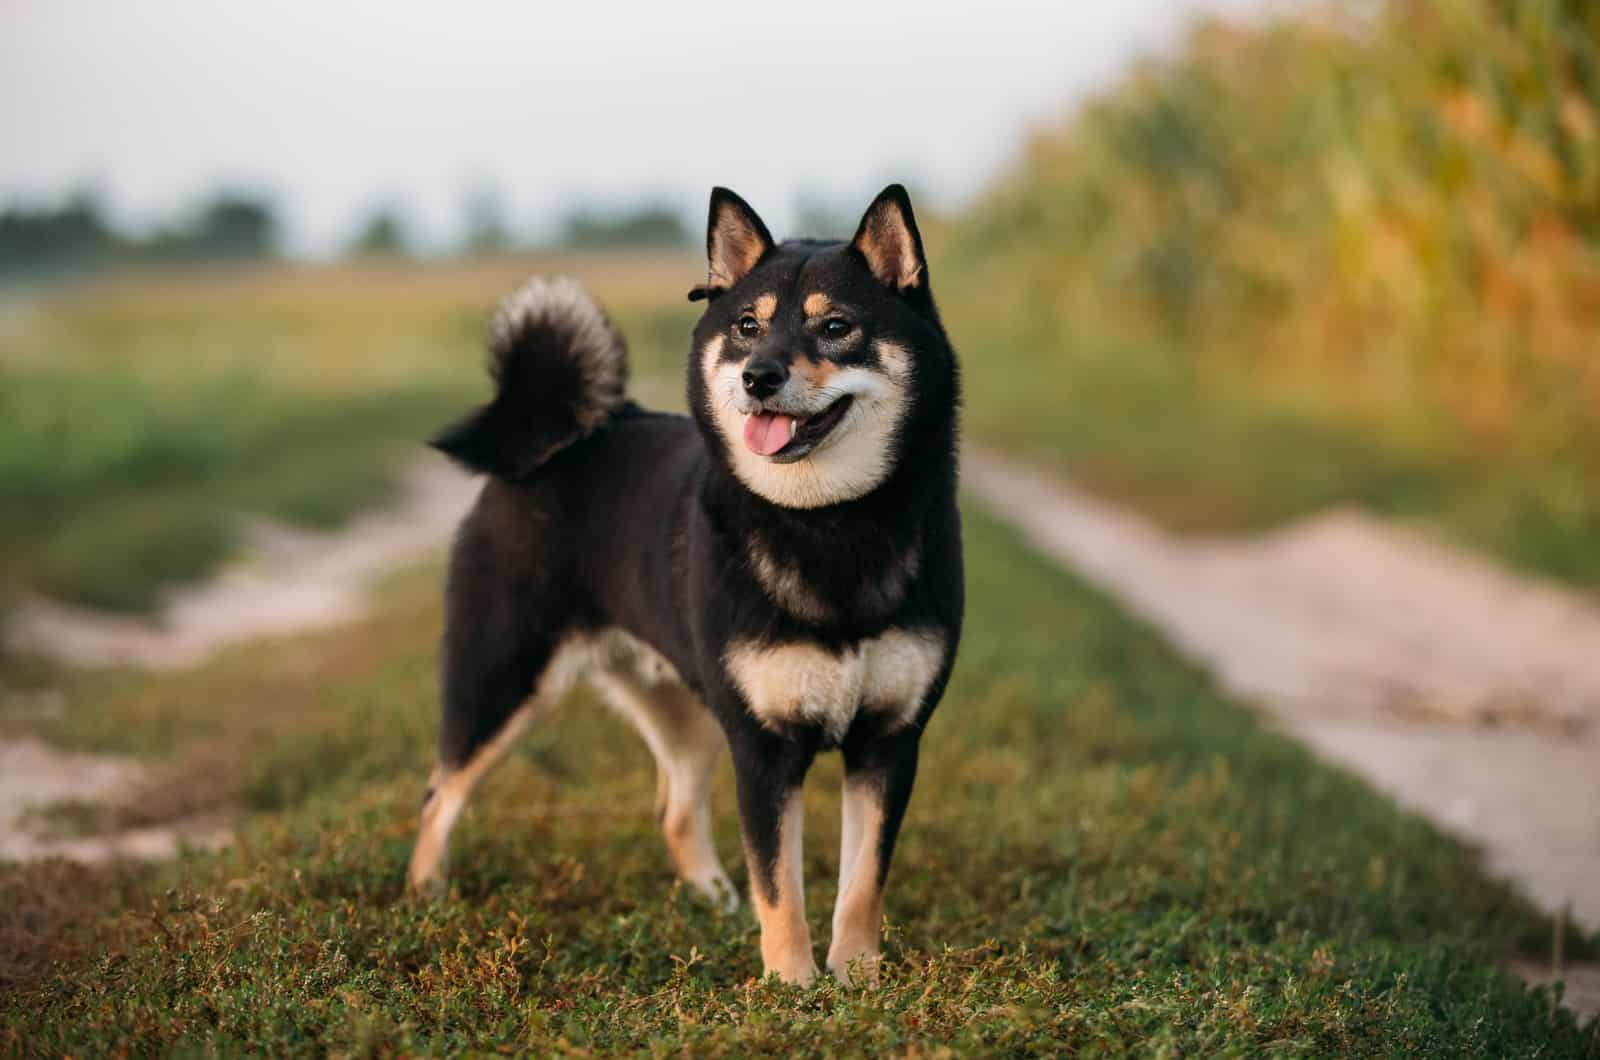 Black Shiba Inu: What You Need To Know Before Buying One